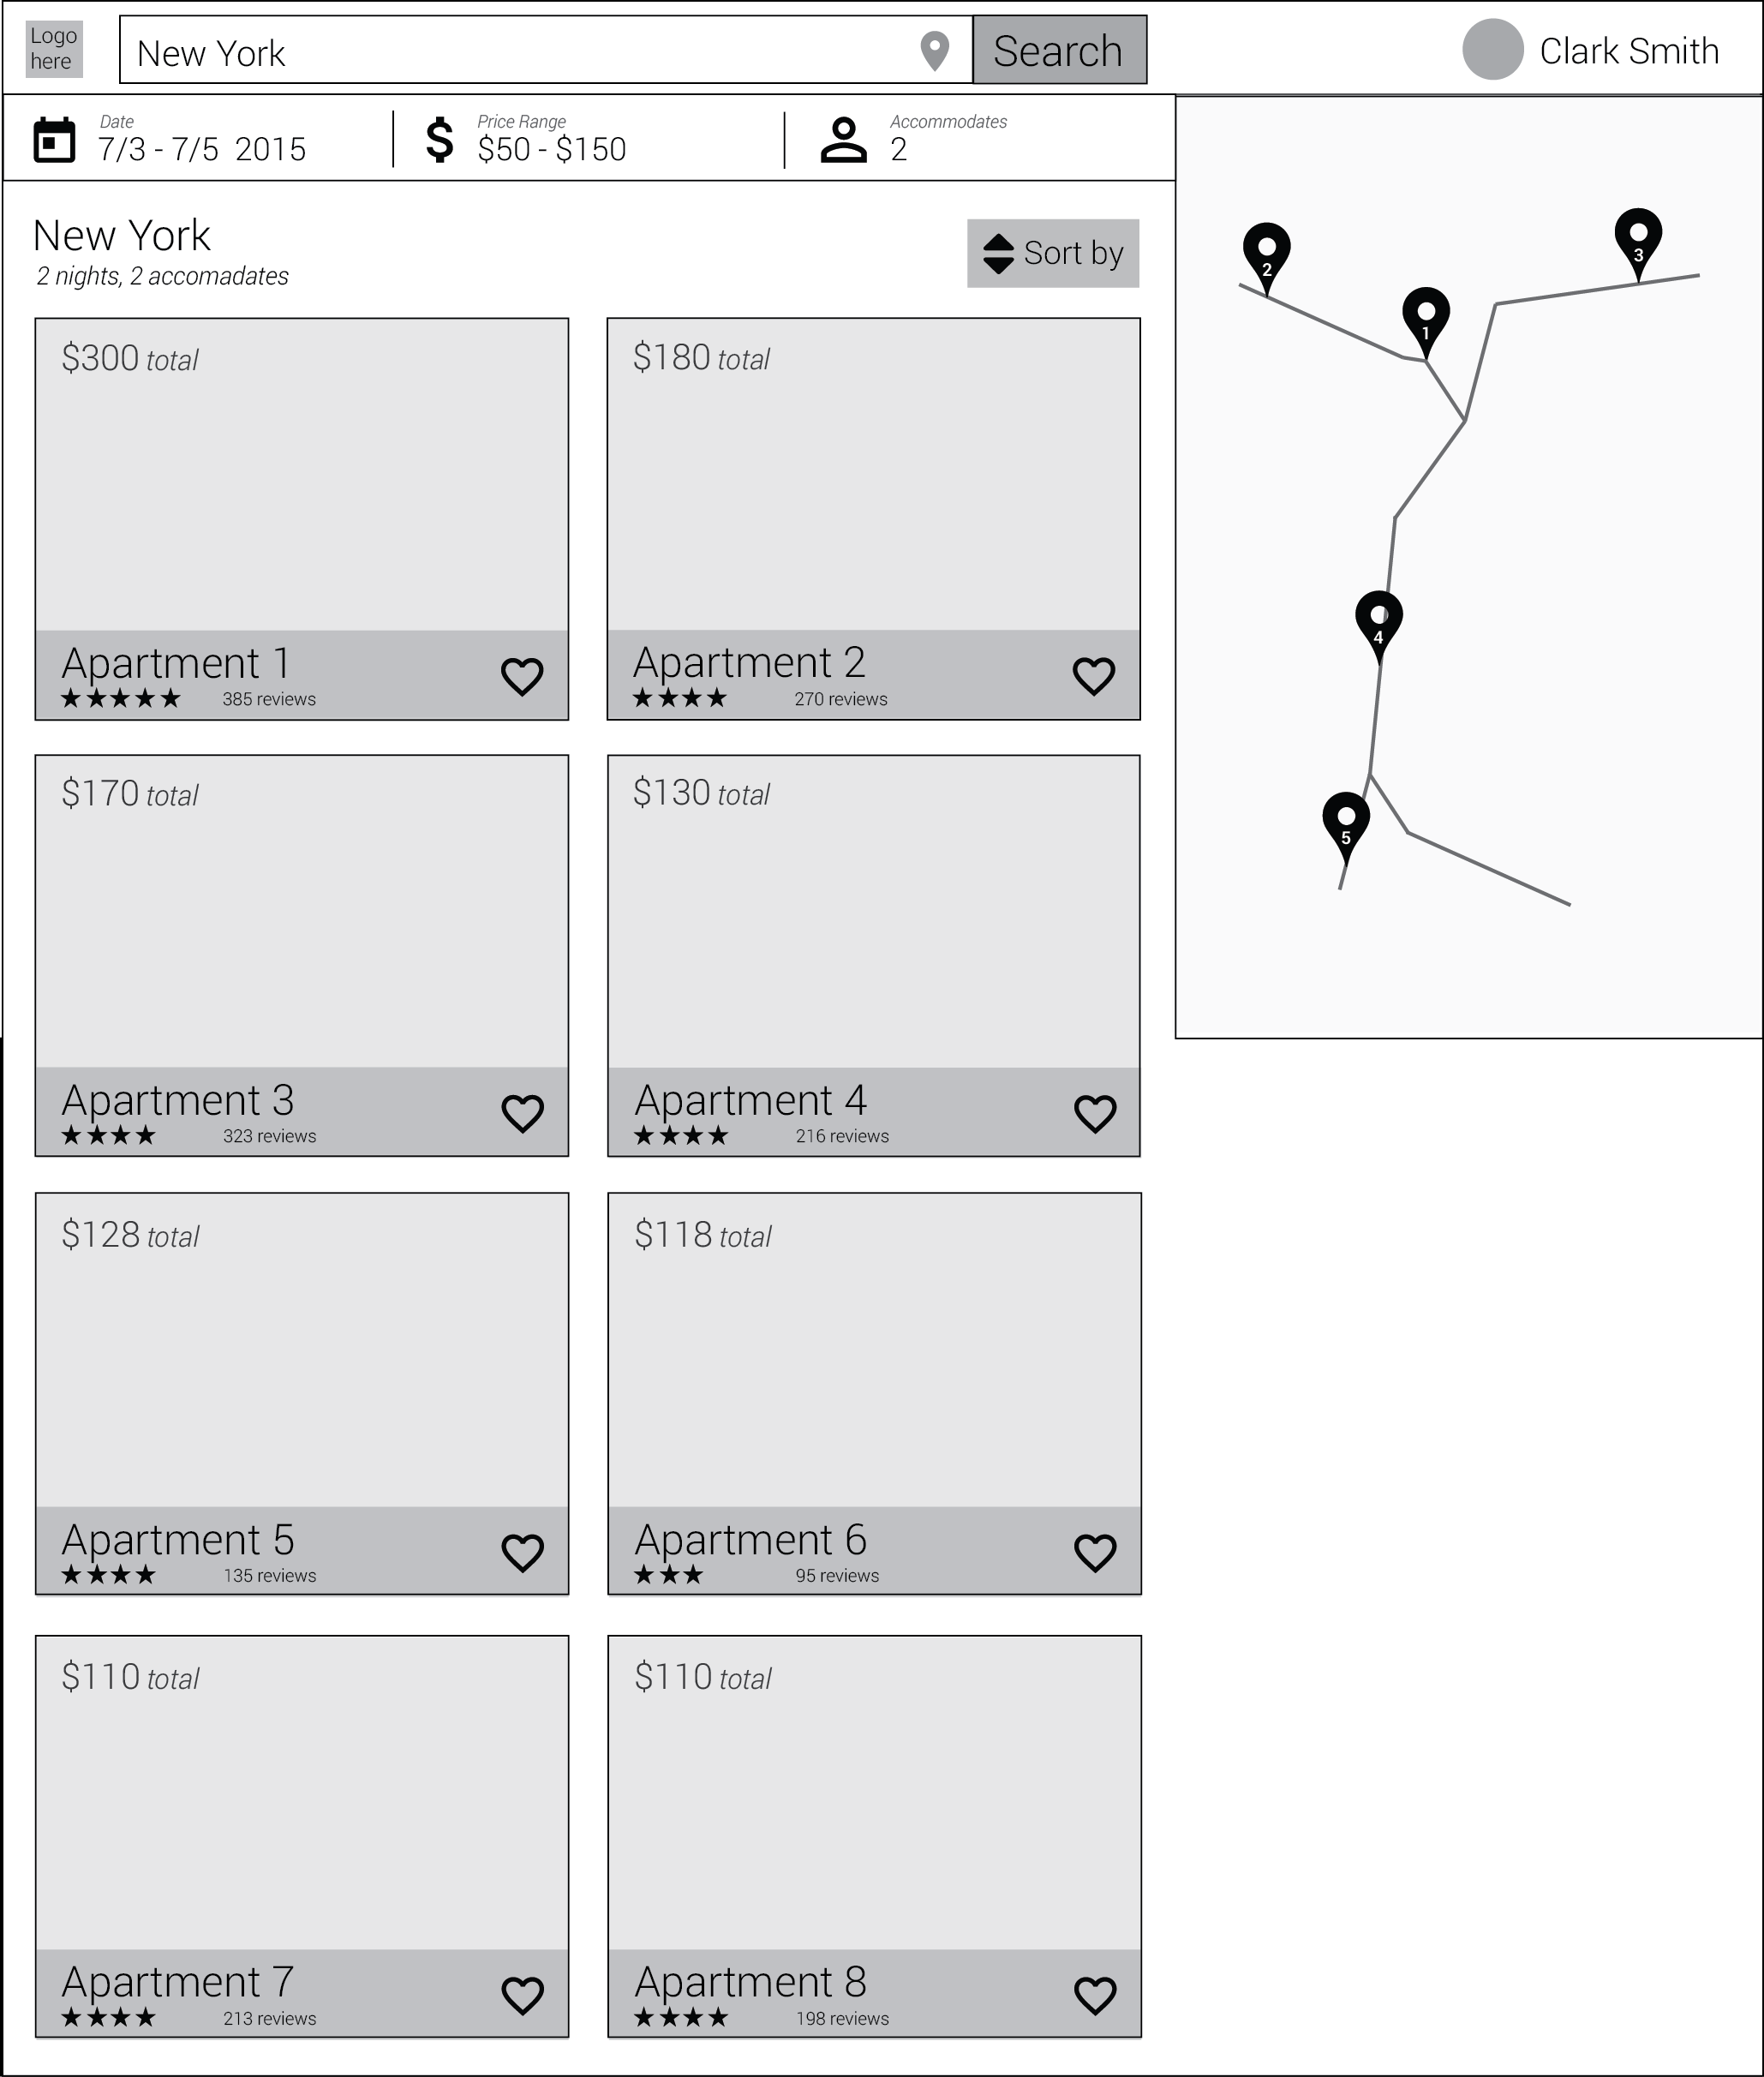 Wireframe, Candidate List - Map is no longer hided under the map icon
												comparing to the mobile design